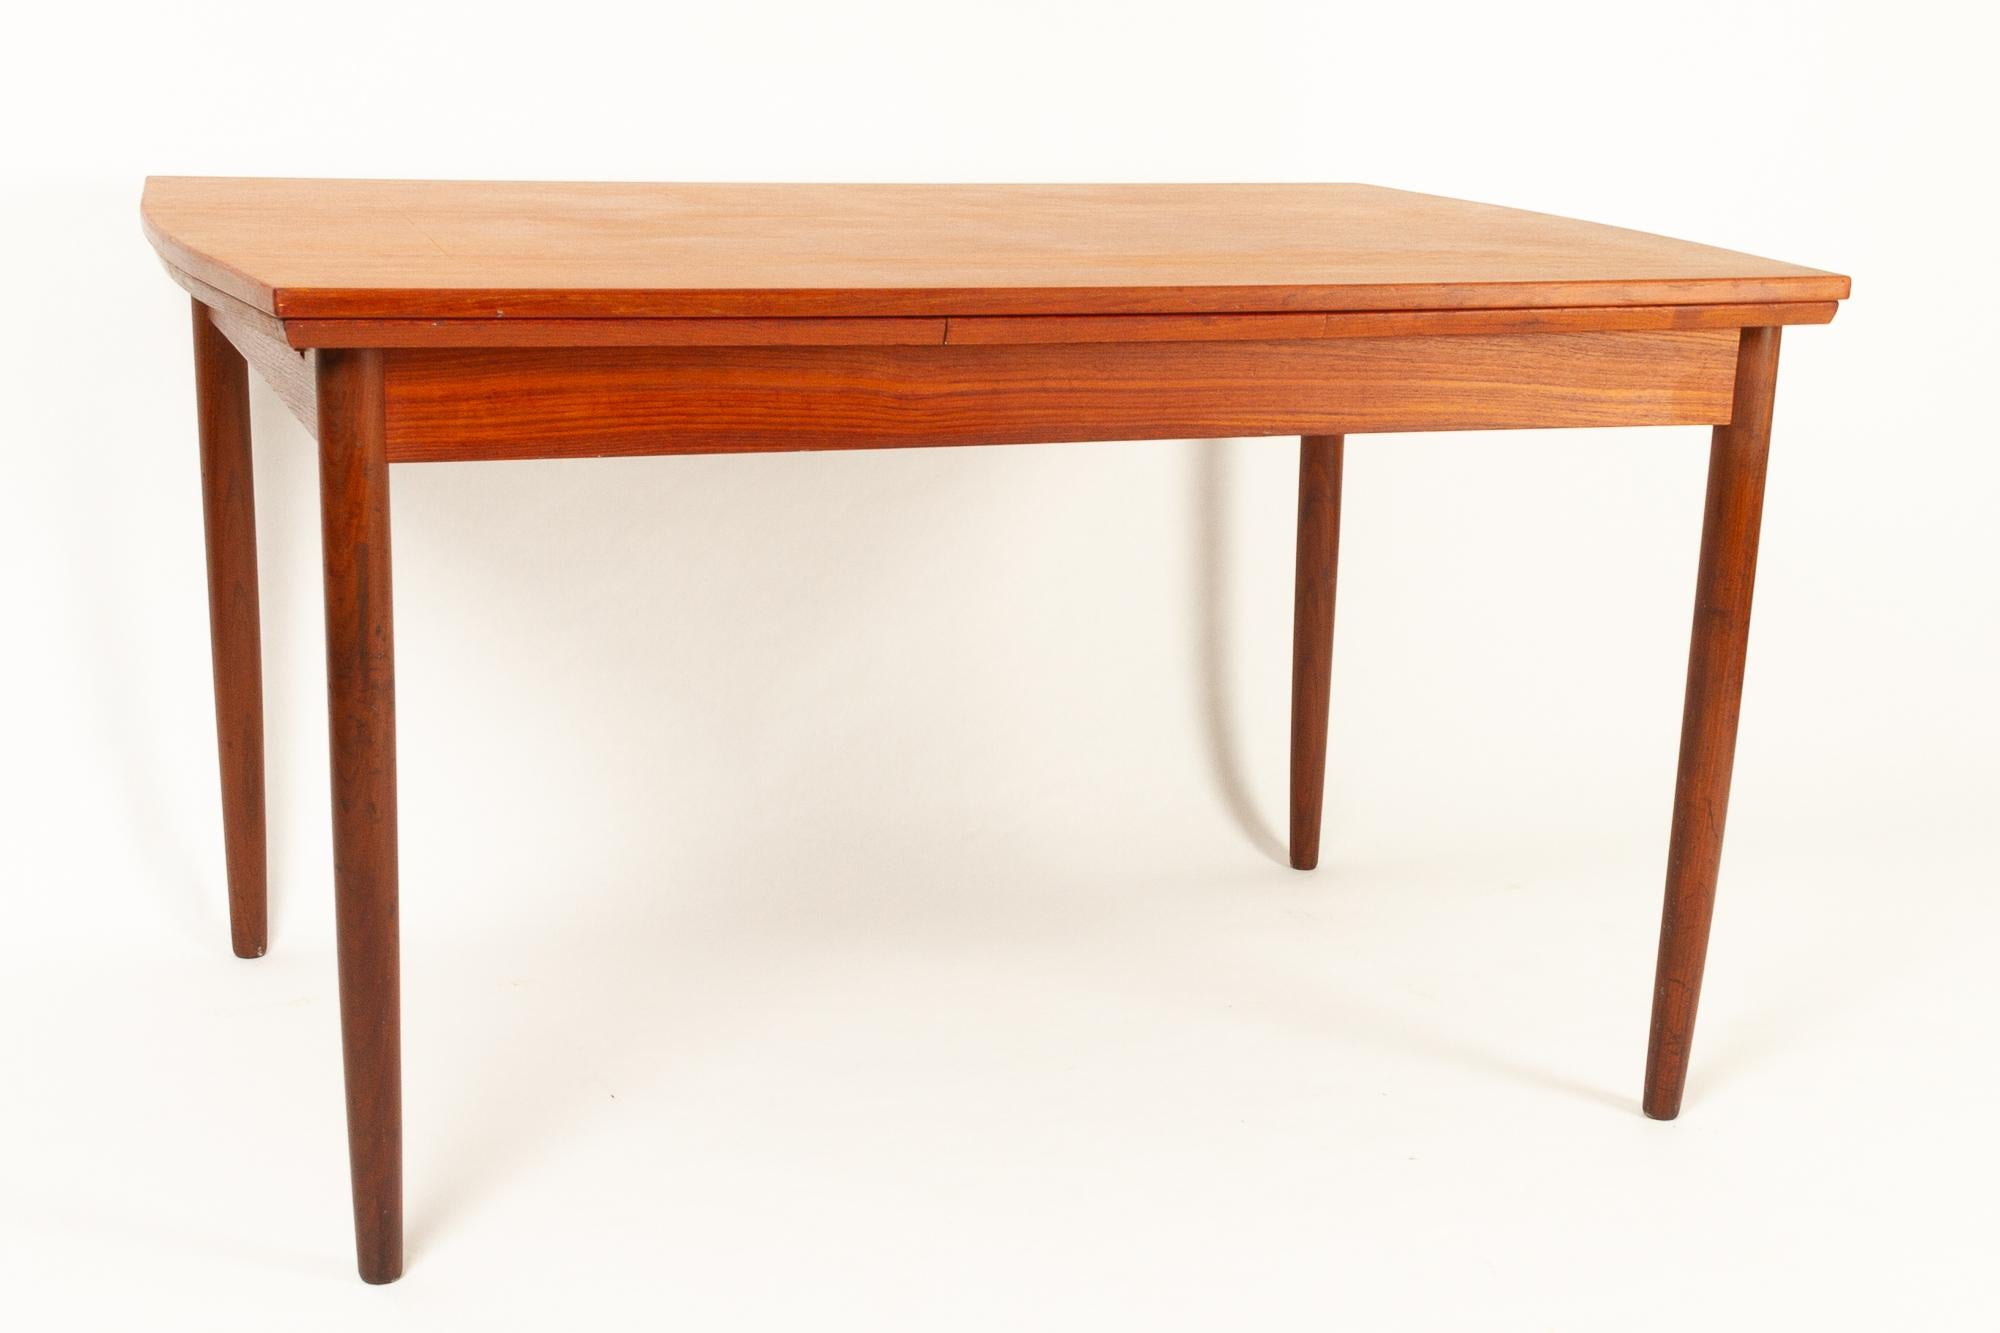 Danish teak extendable dining table, 1960s.
Rectangular Danish Mid-Century Modern dining room table with rounded table ends and extractable leaves. Round tapered legs in solid teak. Lovely teak grain and colour. Very classic Scandinavian modern of